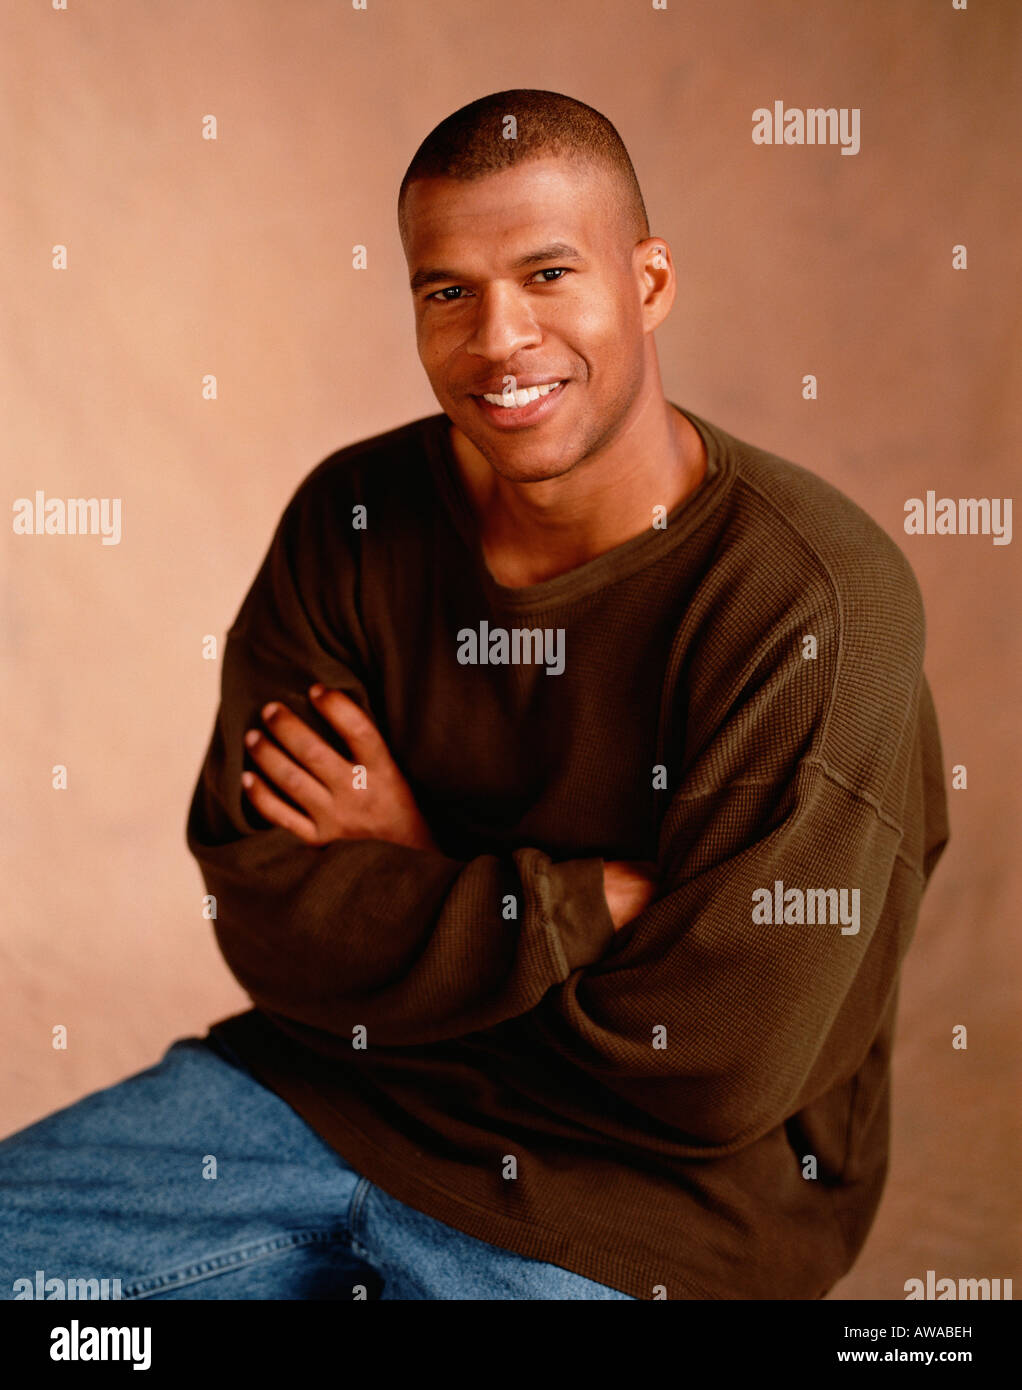 A young good looking African American man smiling in a studio portrait in casual clothing. Stock Photo